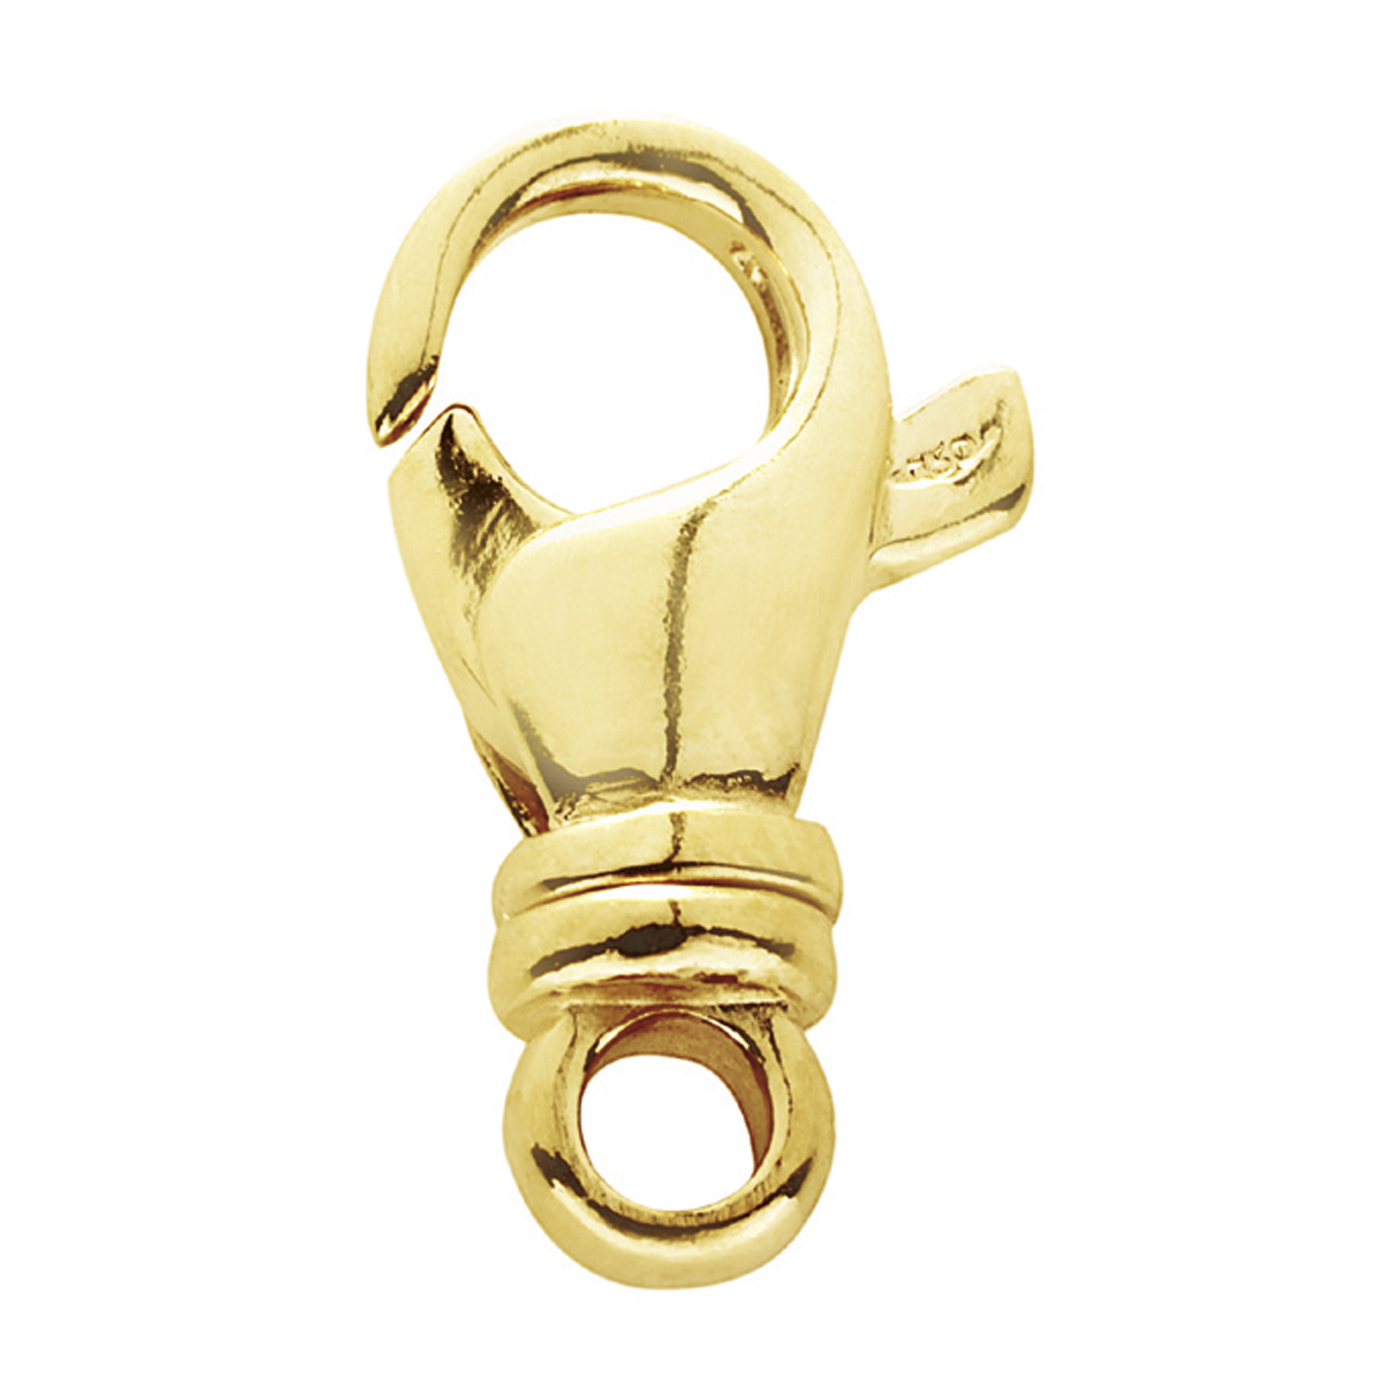 Lobster Clasp, 585G Polished, 18 x 8 mm - 1 piece